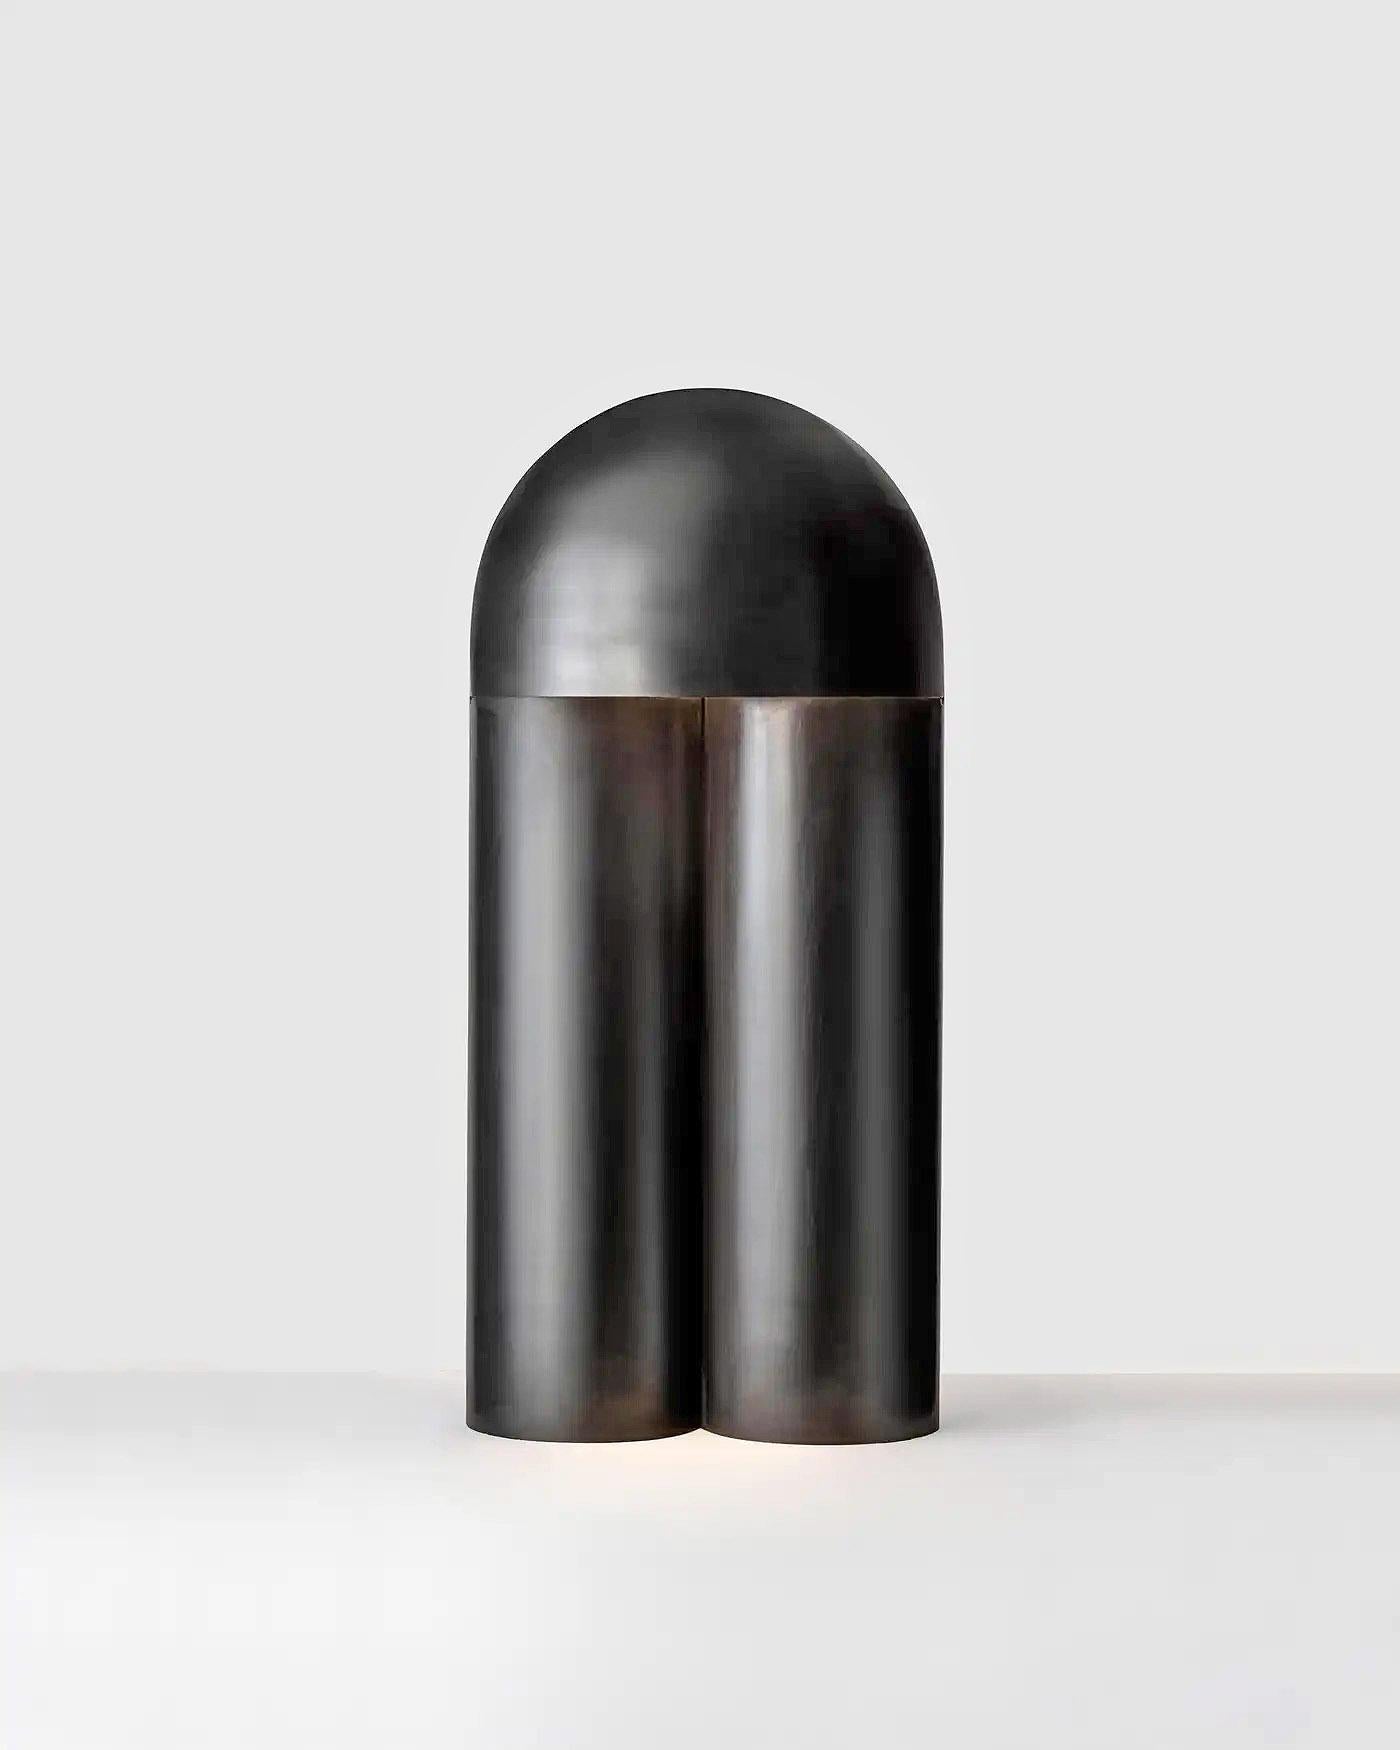 Contemporary Burnt Brass Sculpted Table Lamp, Monolith Large by Paul Matter

The Monolith lamp is an exercise in reduction. Sculpted out of a single body with the help of simple scores and folds, the lamps geometry, surface texture and finish of the